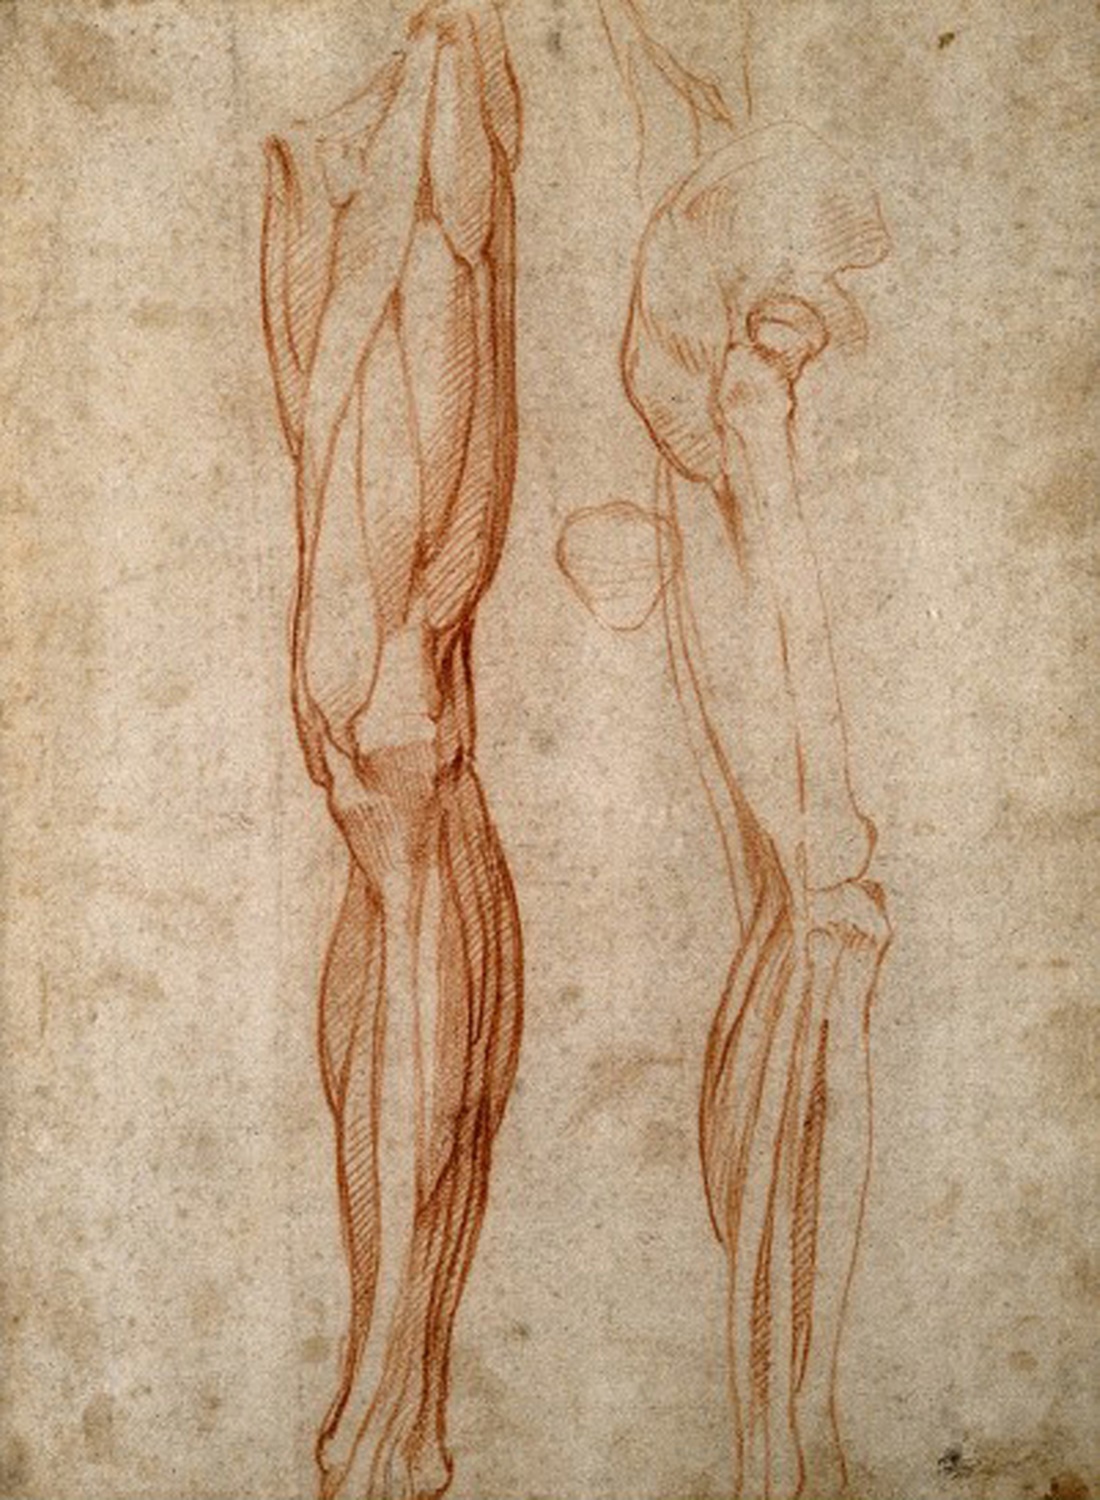 V0007716 The muscles of the left leg, seen from the front, and the boCredit: Wellcome Library, London. Wellcome Imagesimages@wellcome.ac.ukhttp://images.wellcome.ac.ukThe muscles of the left leg, seen from the front, and the bones and muscles of the right leg seen in right profile, and between them, a patella. Drawing by Michelangelo Buonarotti, c. 1515-1520.By: Michelangelo BuonarrotiPublished:  - Copyrighted work available under Creative Commons by-nc 2.0 UK, see http://images.wellcome.ac.uk/indexplus/page/Prices.html